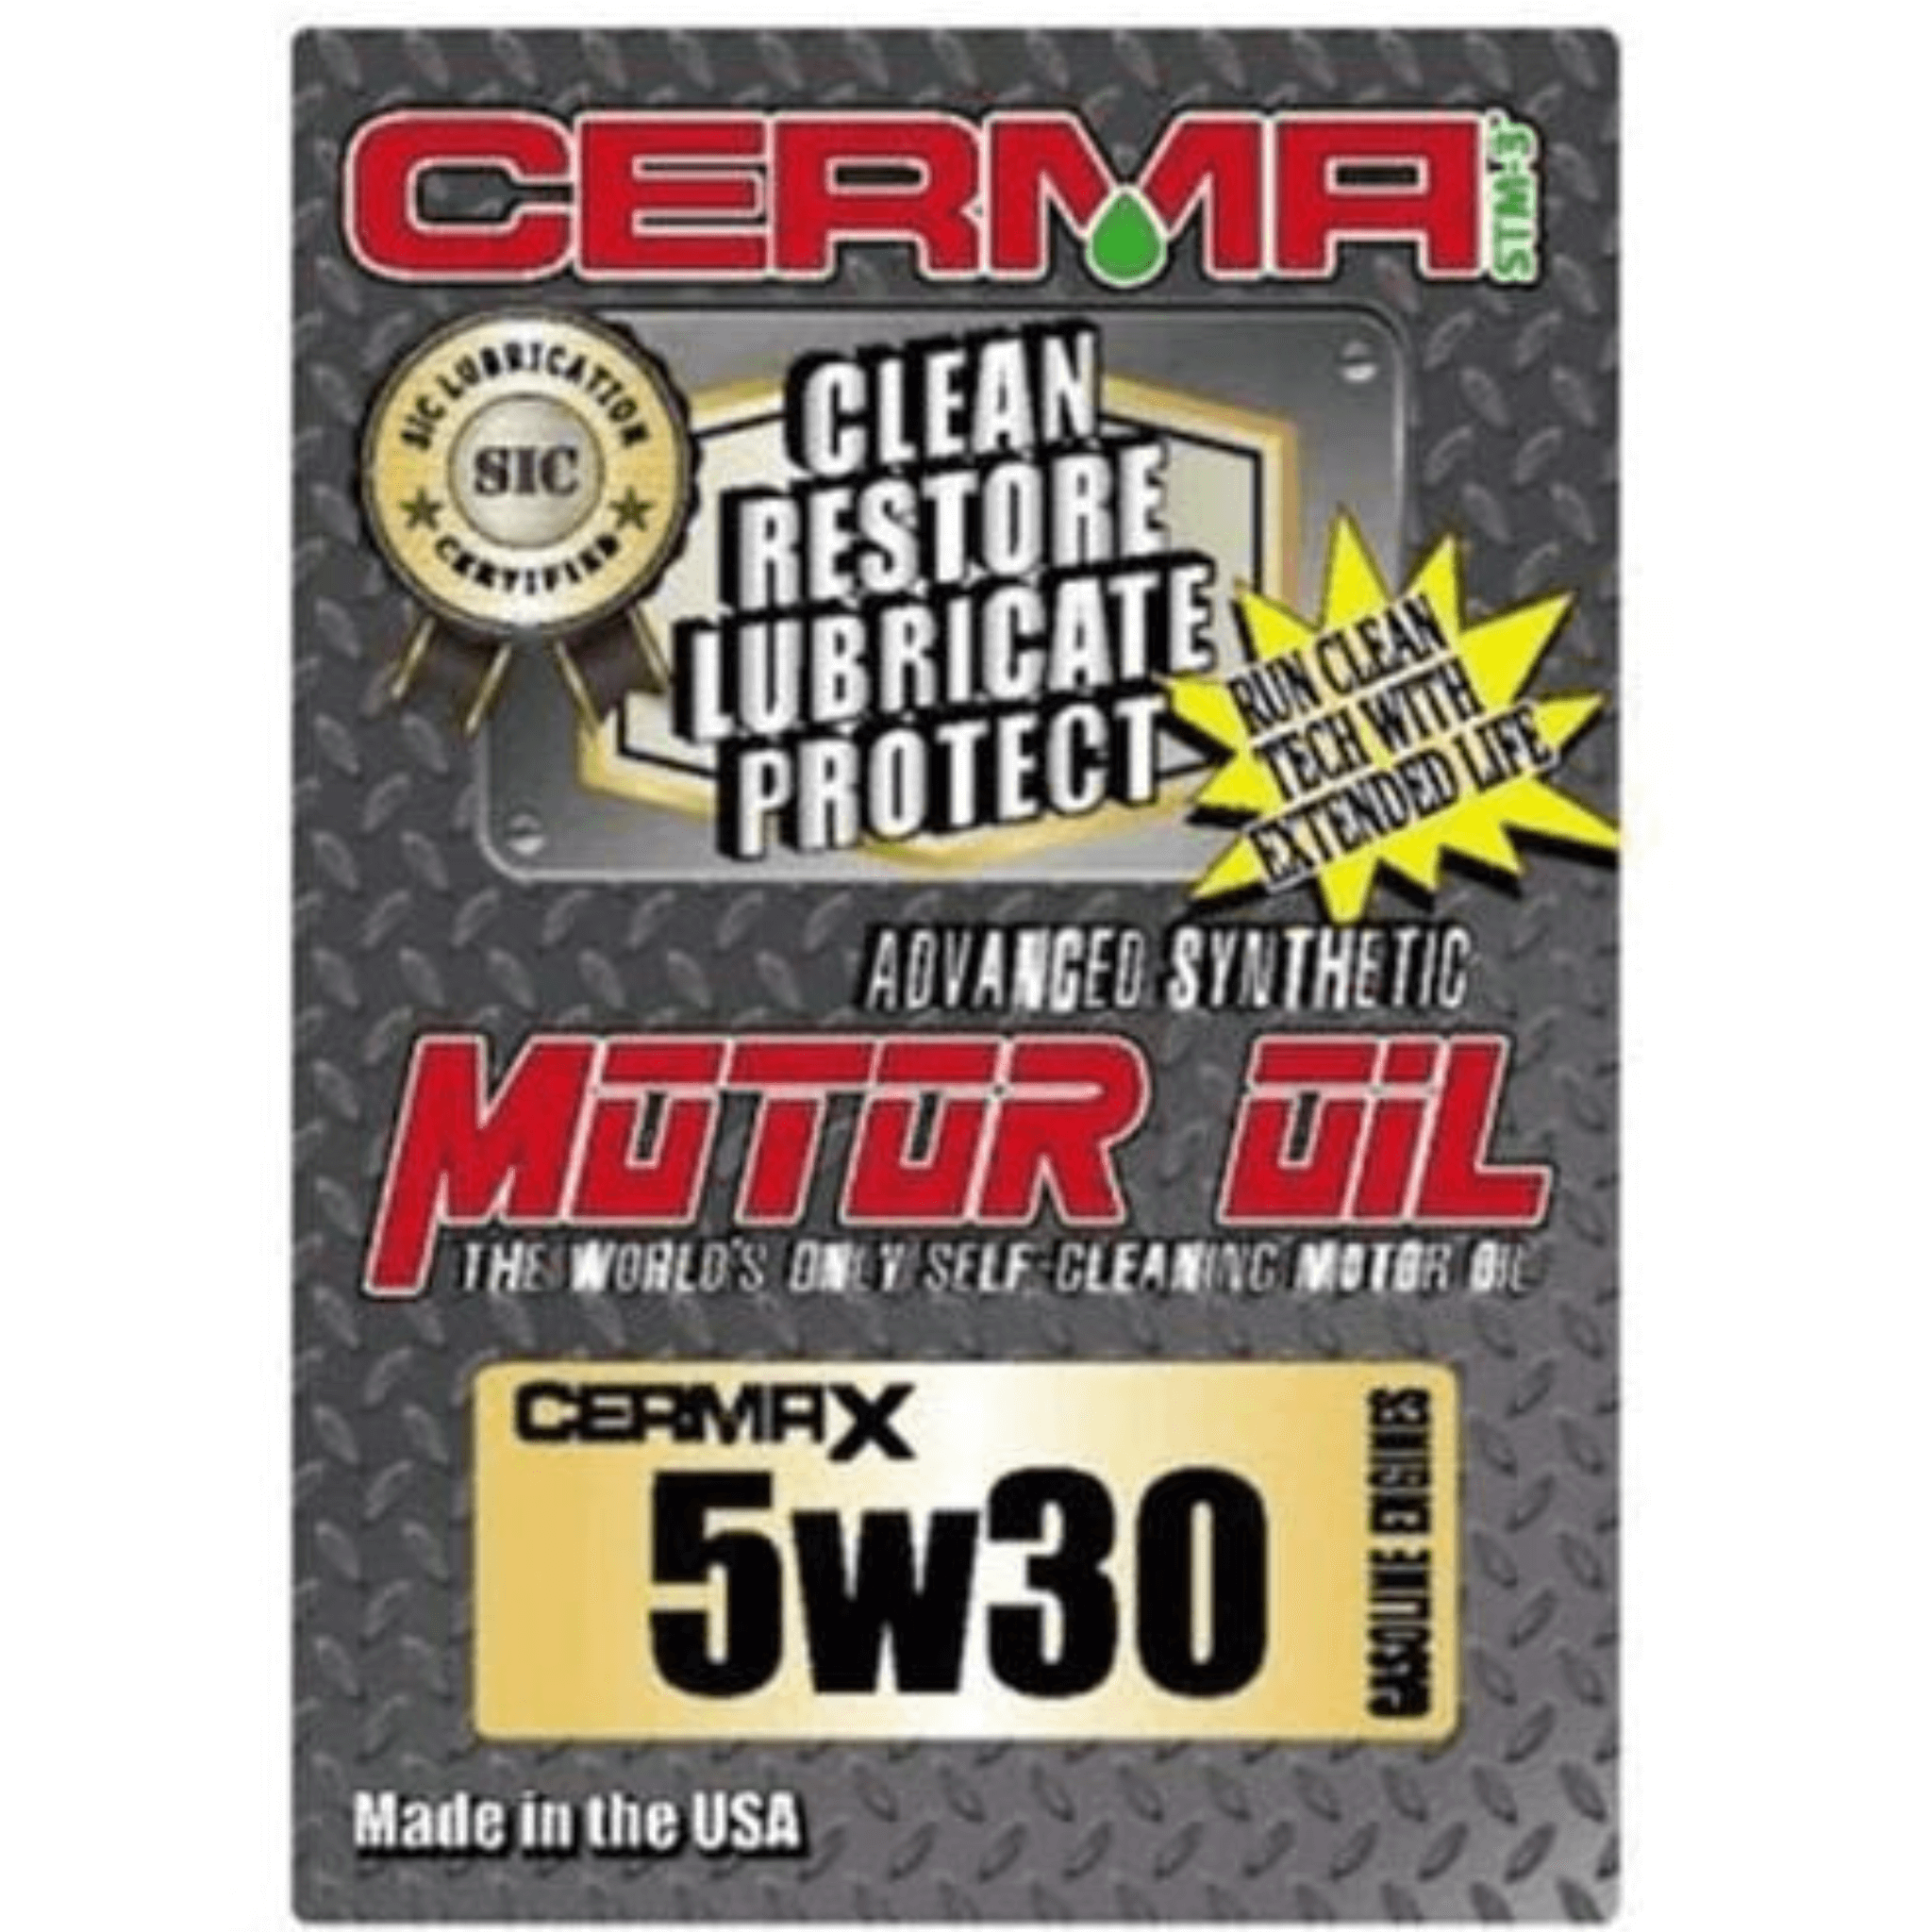 5w30 Oil: The Ultimate Guide to Choosing the Right Motor Oil